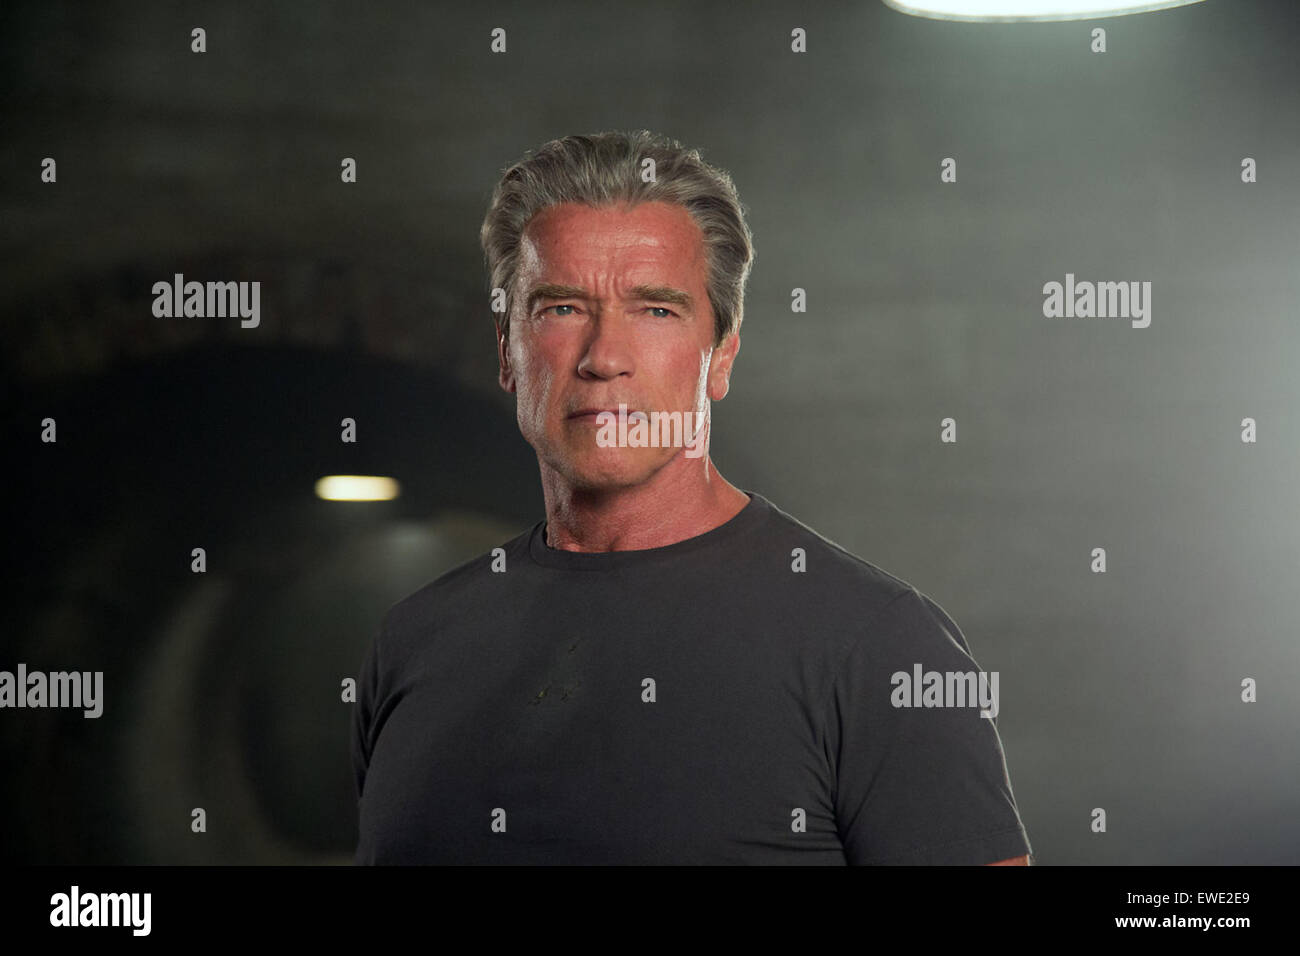 Terminator Genisys is an upcoming 2015 American science fiction action film directed by Alan Taylor and written by Laeta Kalogridis and Patrick Lussier. It is the fifth installment in the Terminator series and will serve as a retcon sequel to the series. Arnold Schwarzenegger reprises his role as the titular character. Stock Photo